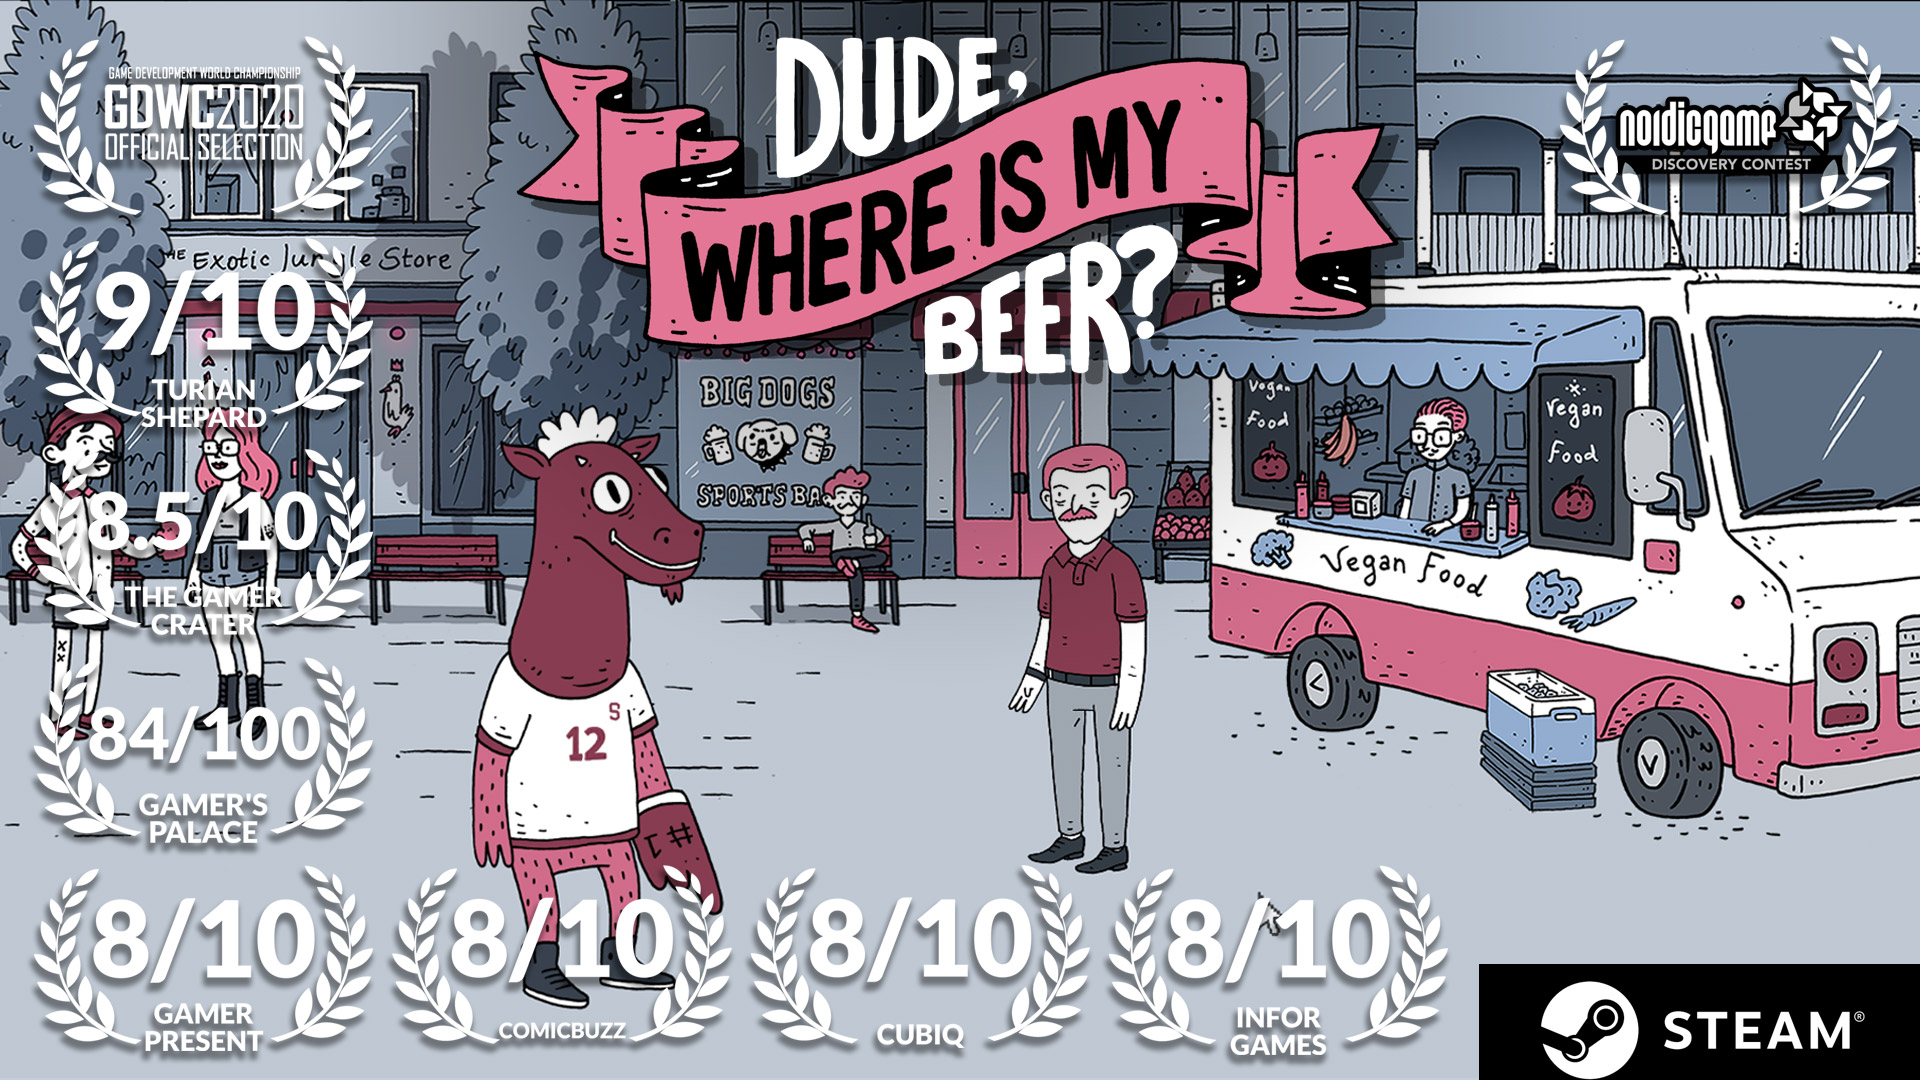 Title image from 'Dude, Where Is My Beer?'